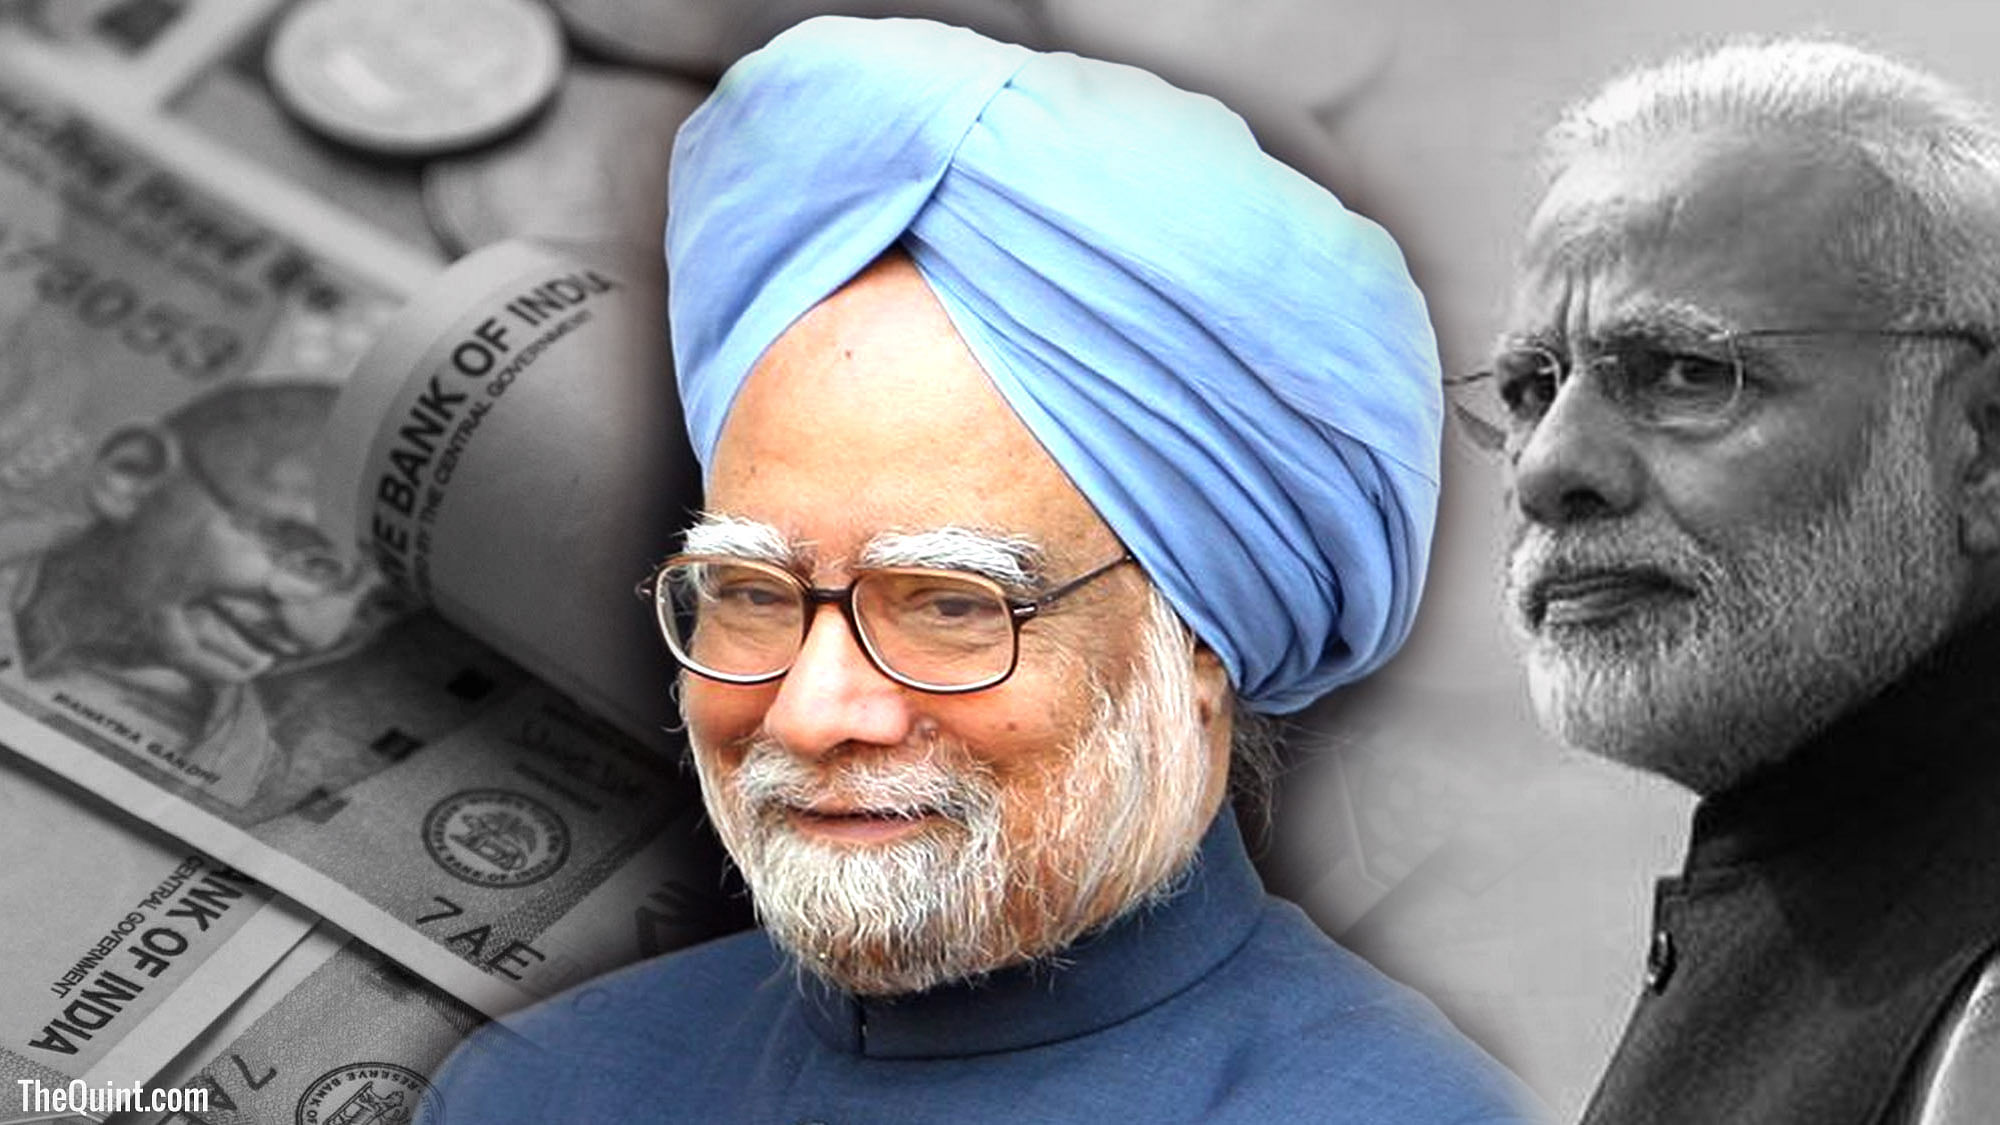 Former PM Manmohan Singh slammed the Modi government’s decision to impose the note ban, saying the “ill-fated” exercise had wreaked havoc on the economy.